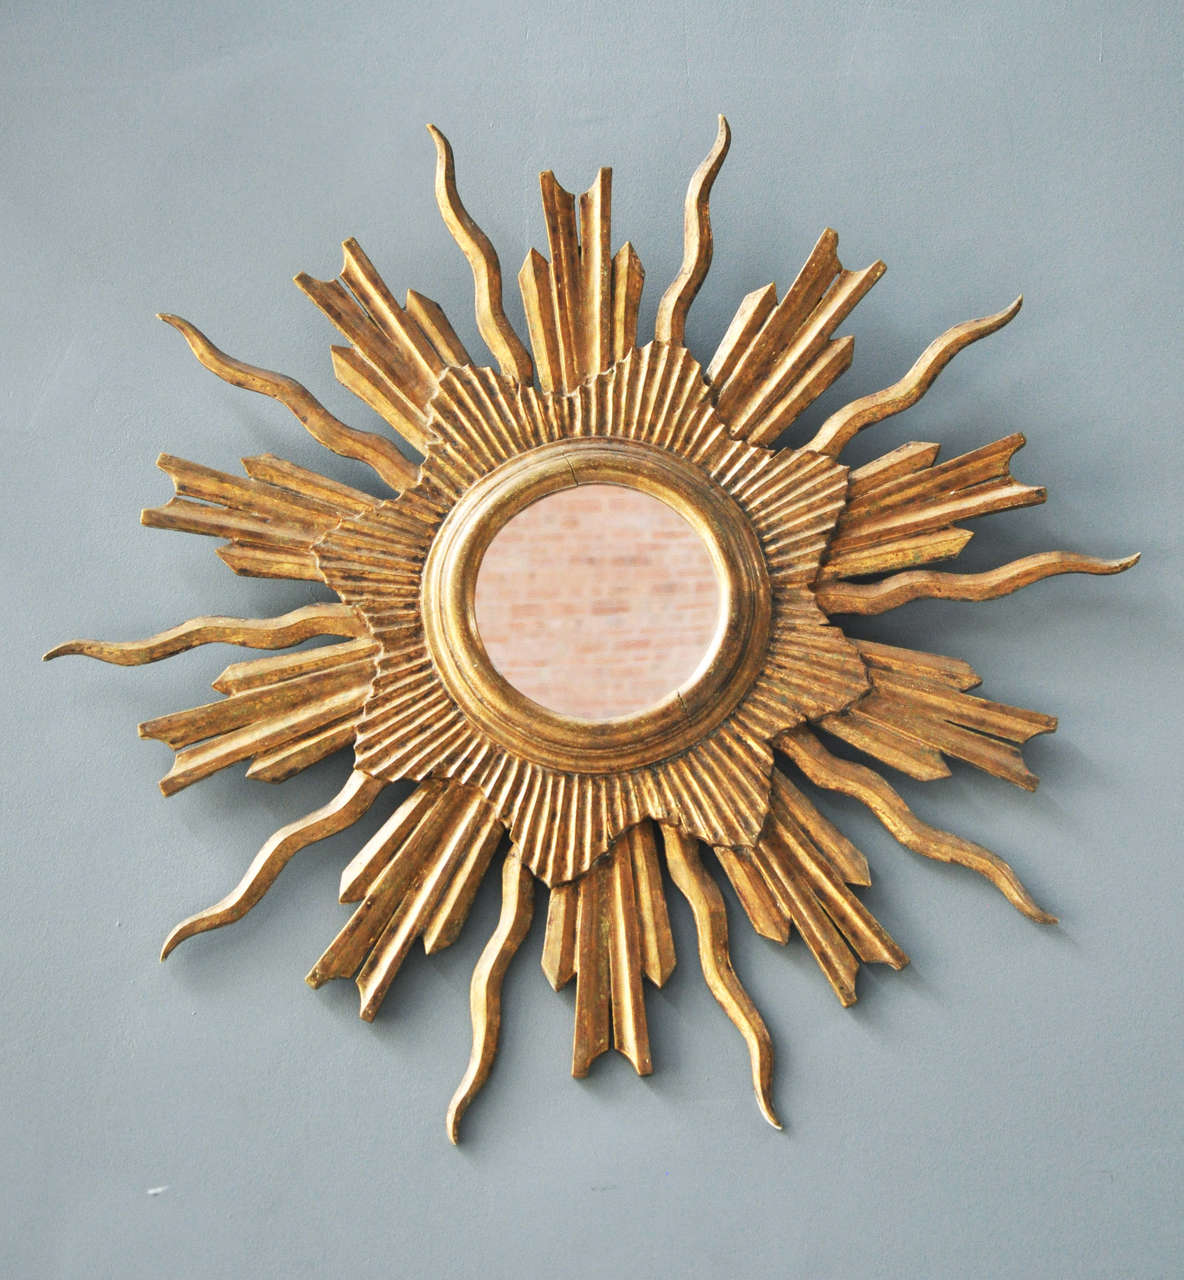 A French sunburst mirror with wonderfully carved and gilt wood rays, circa 1920s.